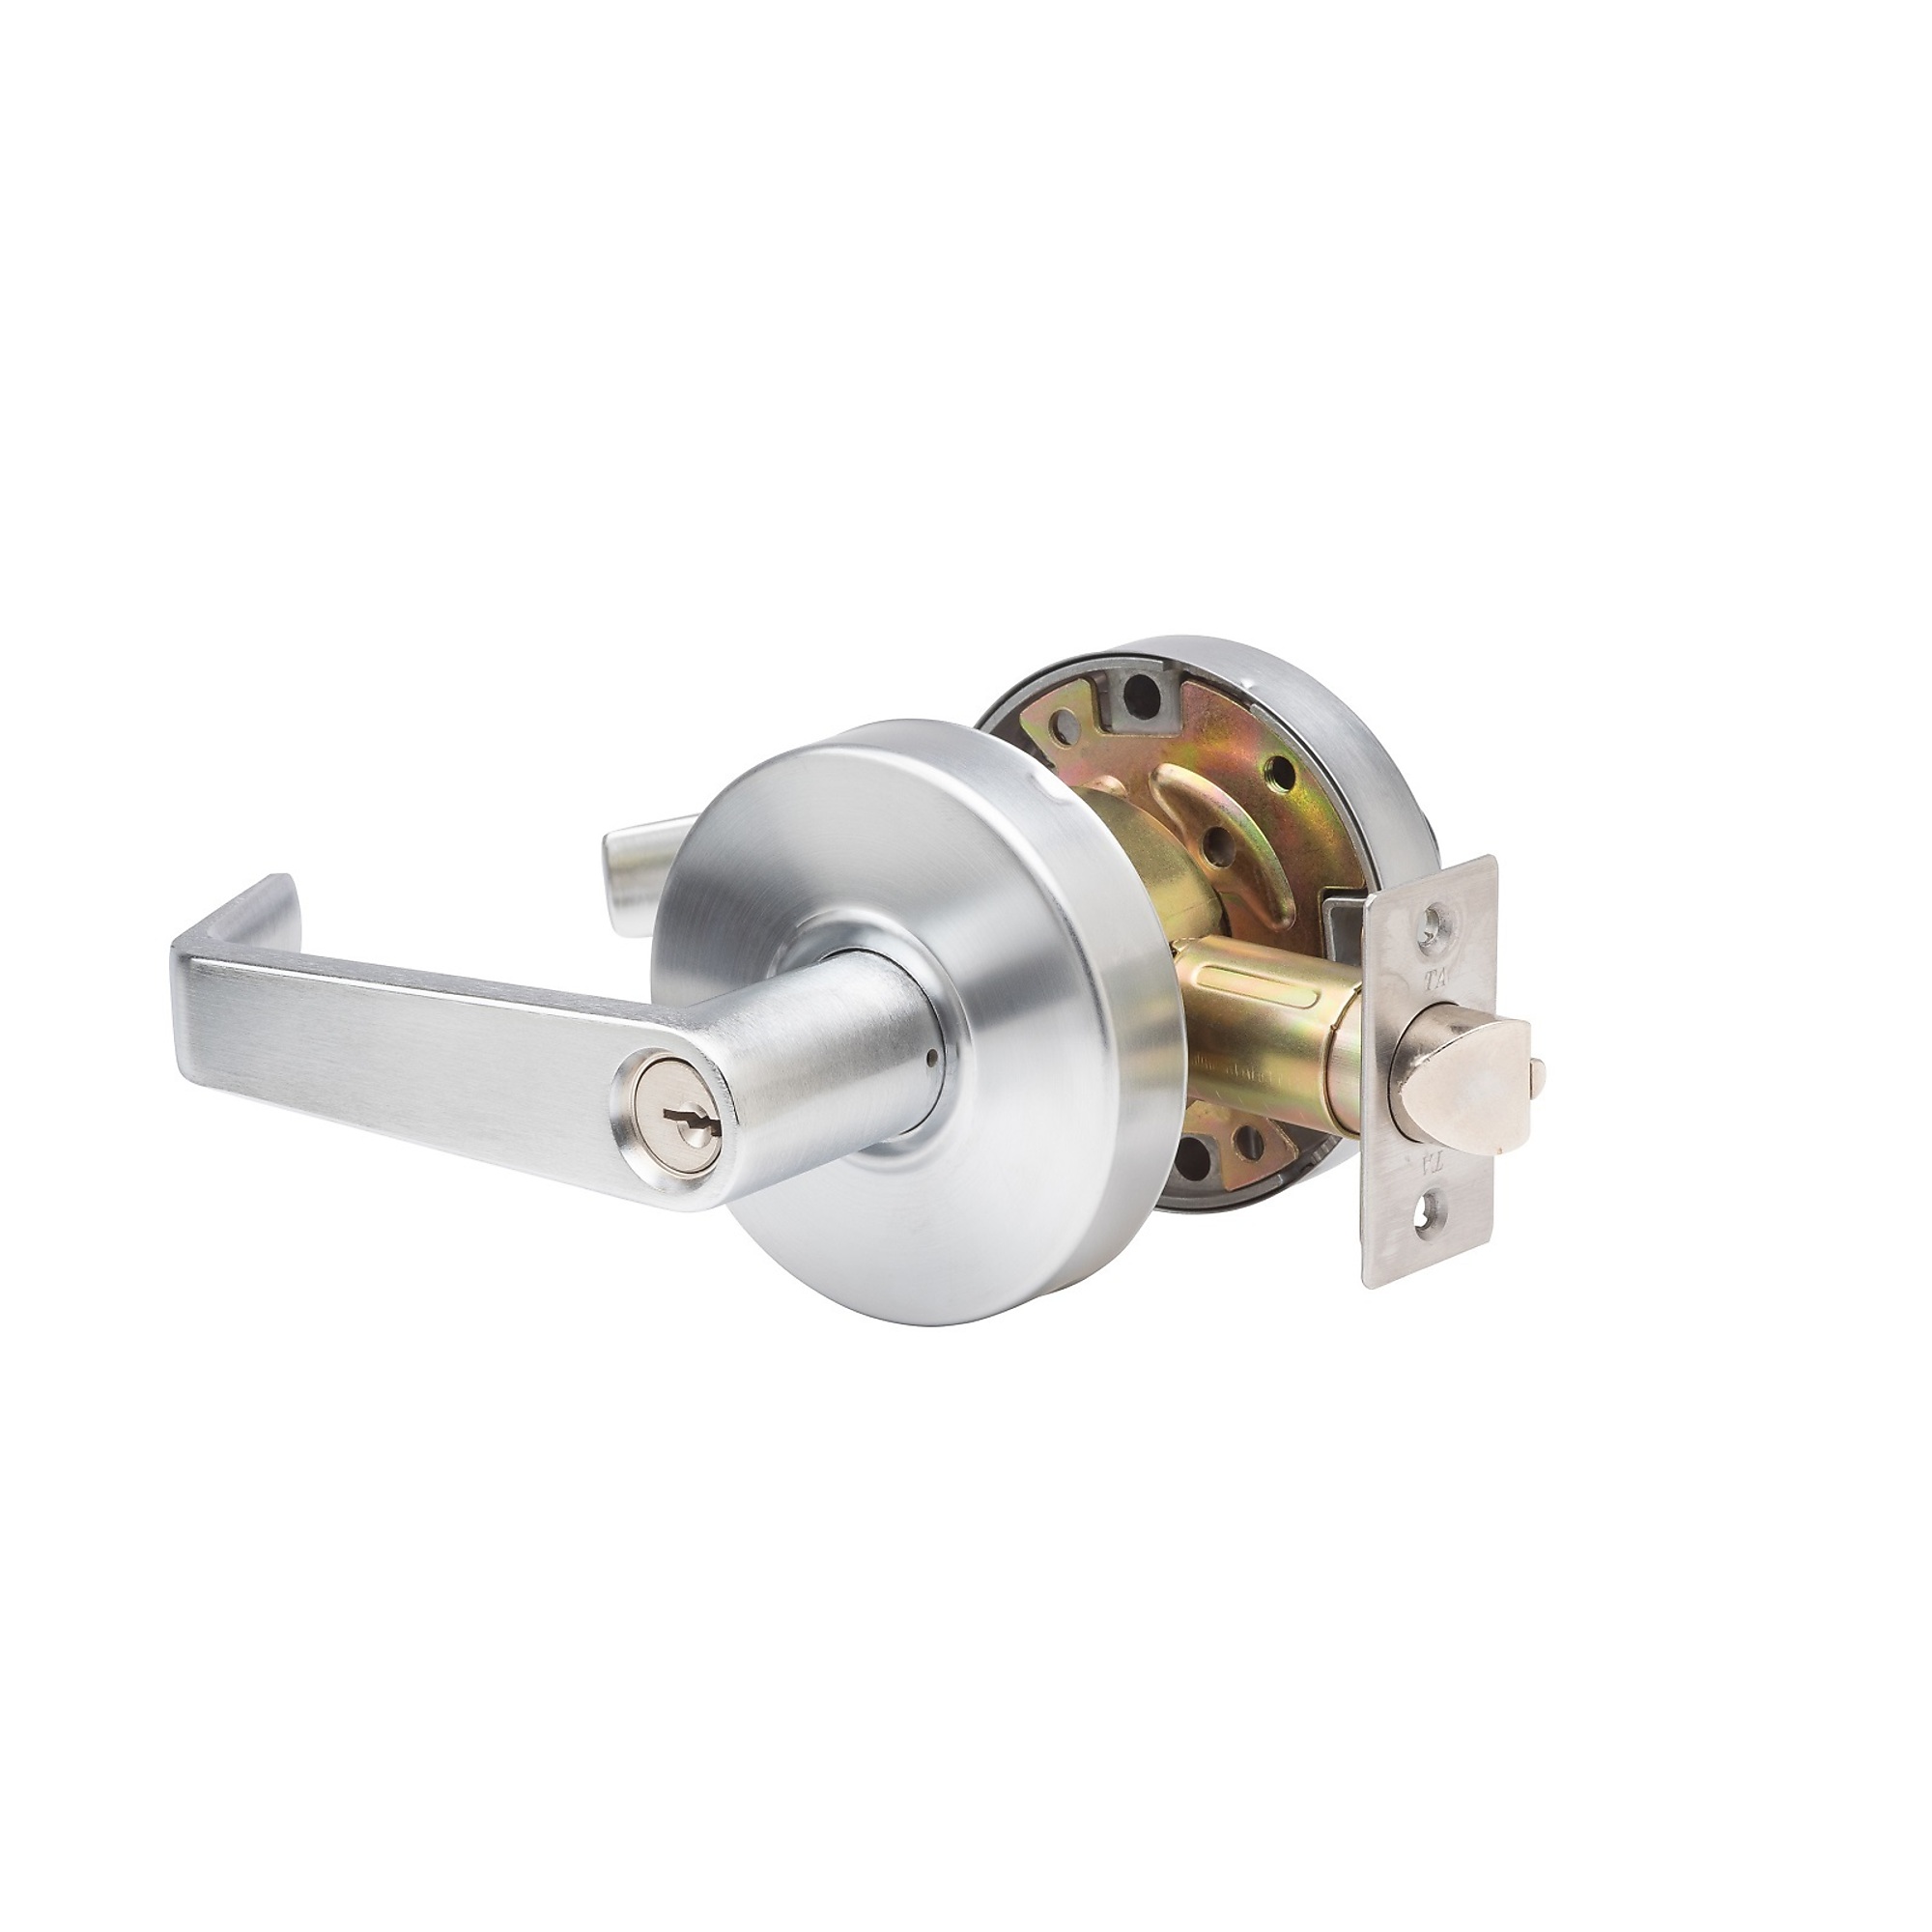 Trans Atlantic, Saturn Series Commercial Cylindrical Door Handle with Lock, Model DL-LSV70-US26D